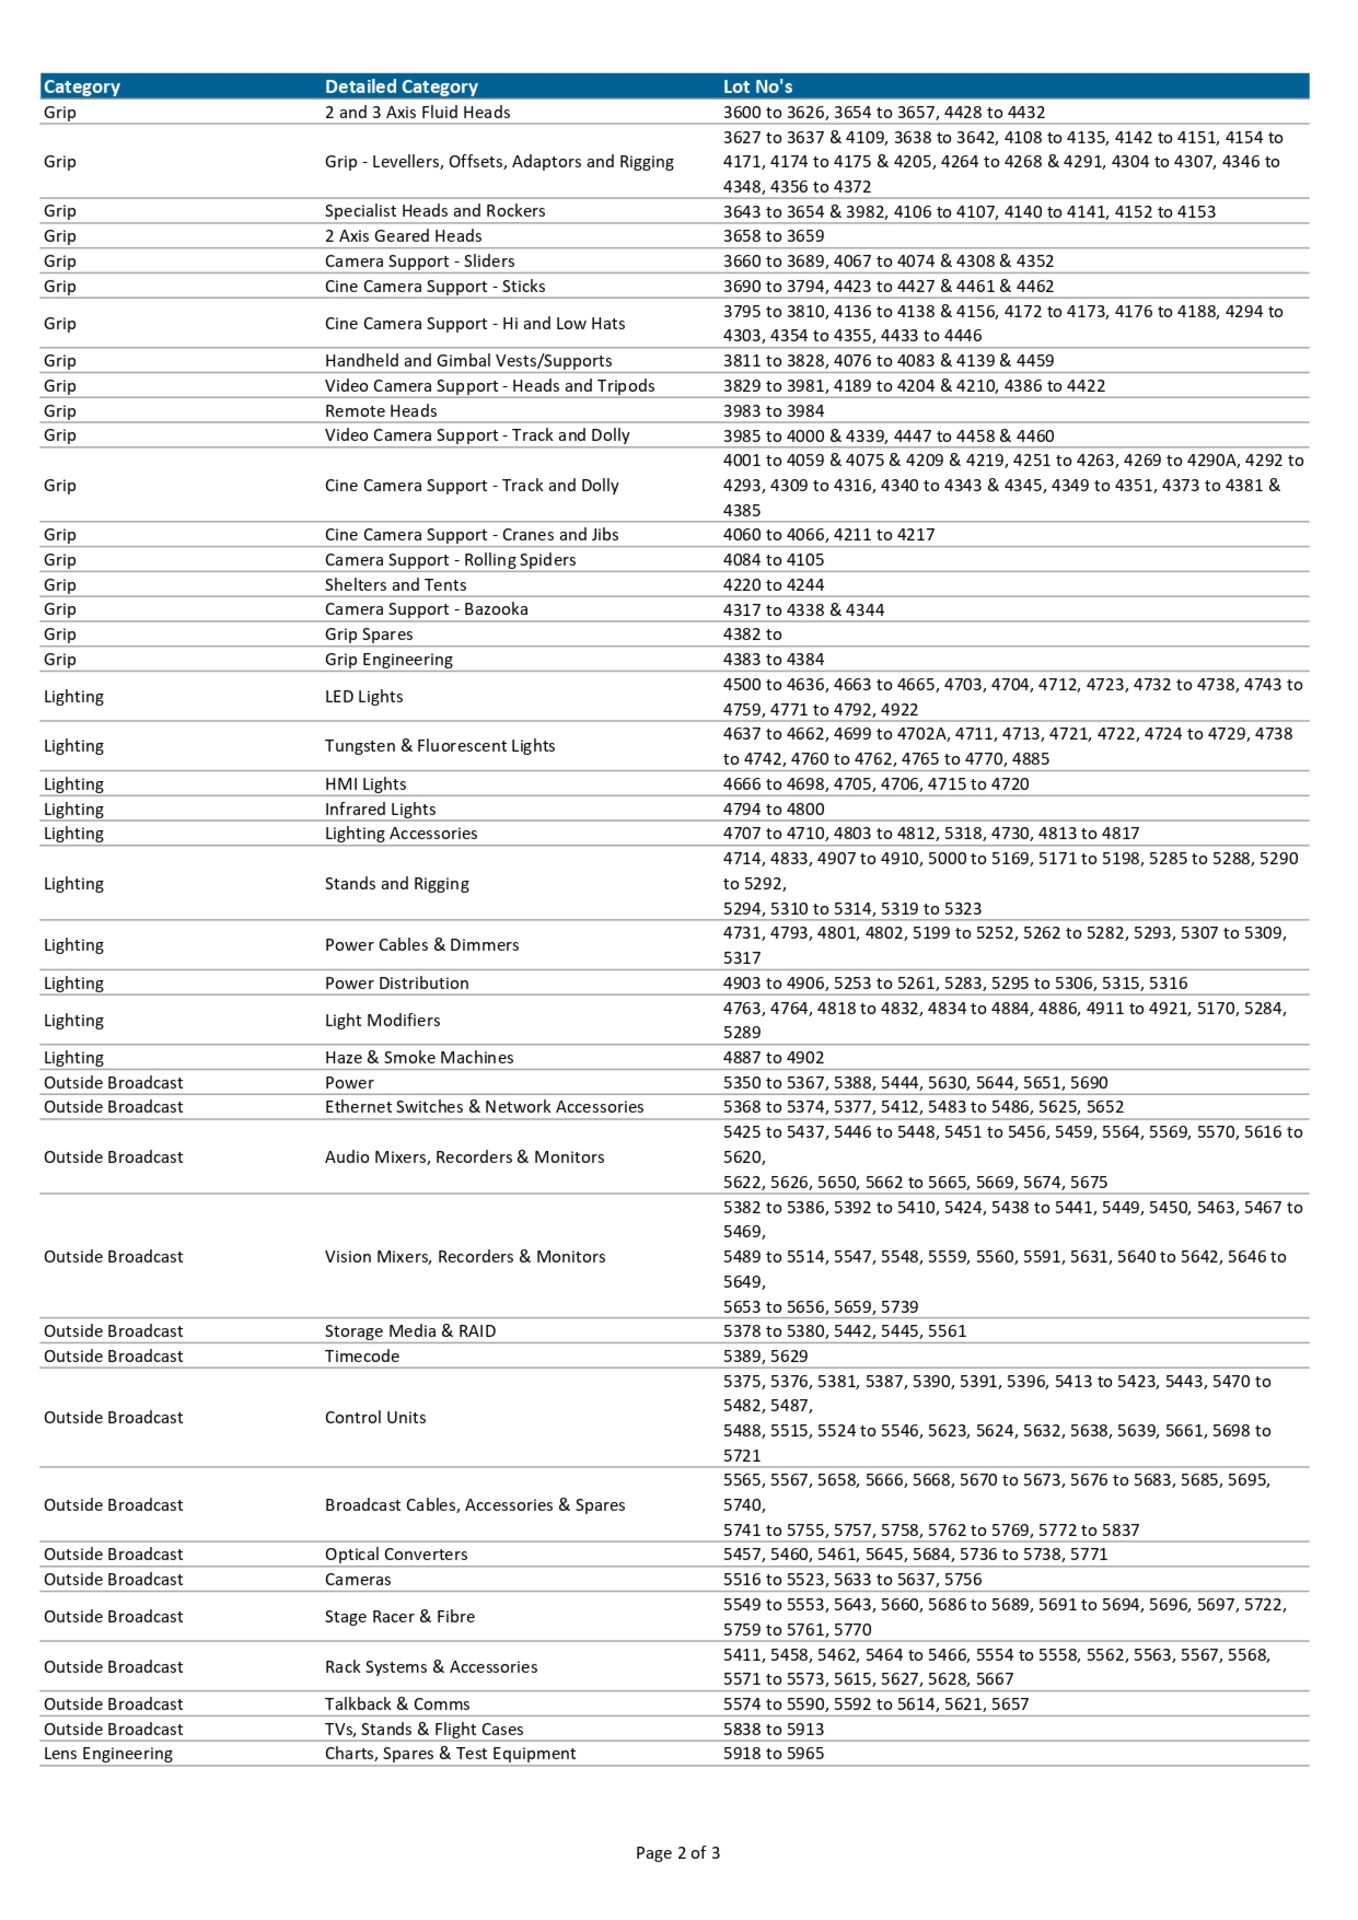 Summary of Lot End Times and Auction Categories - Image 3 of 4